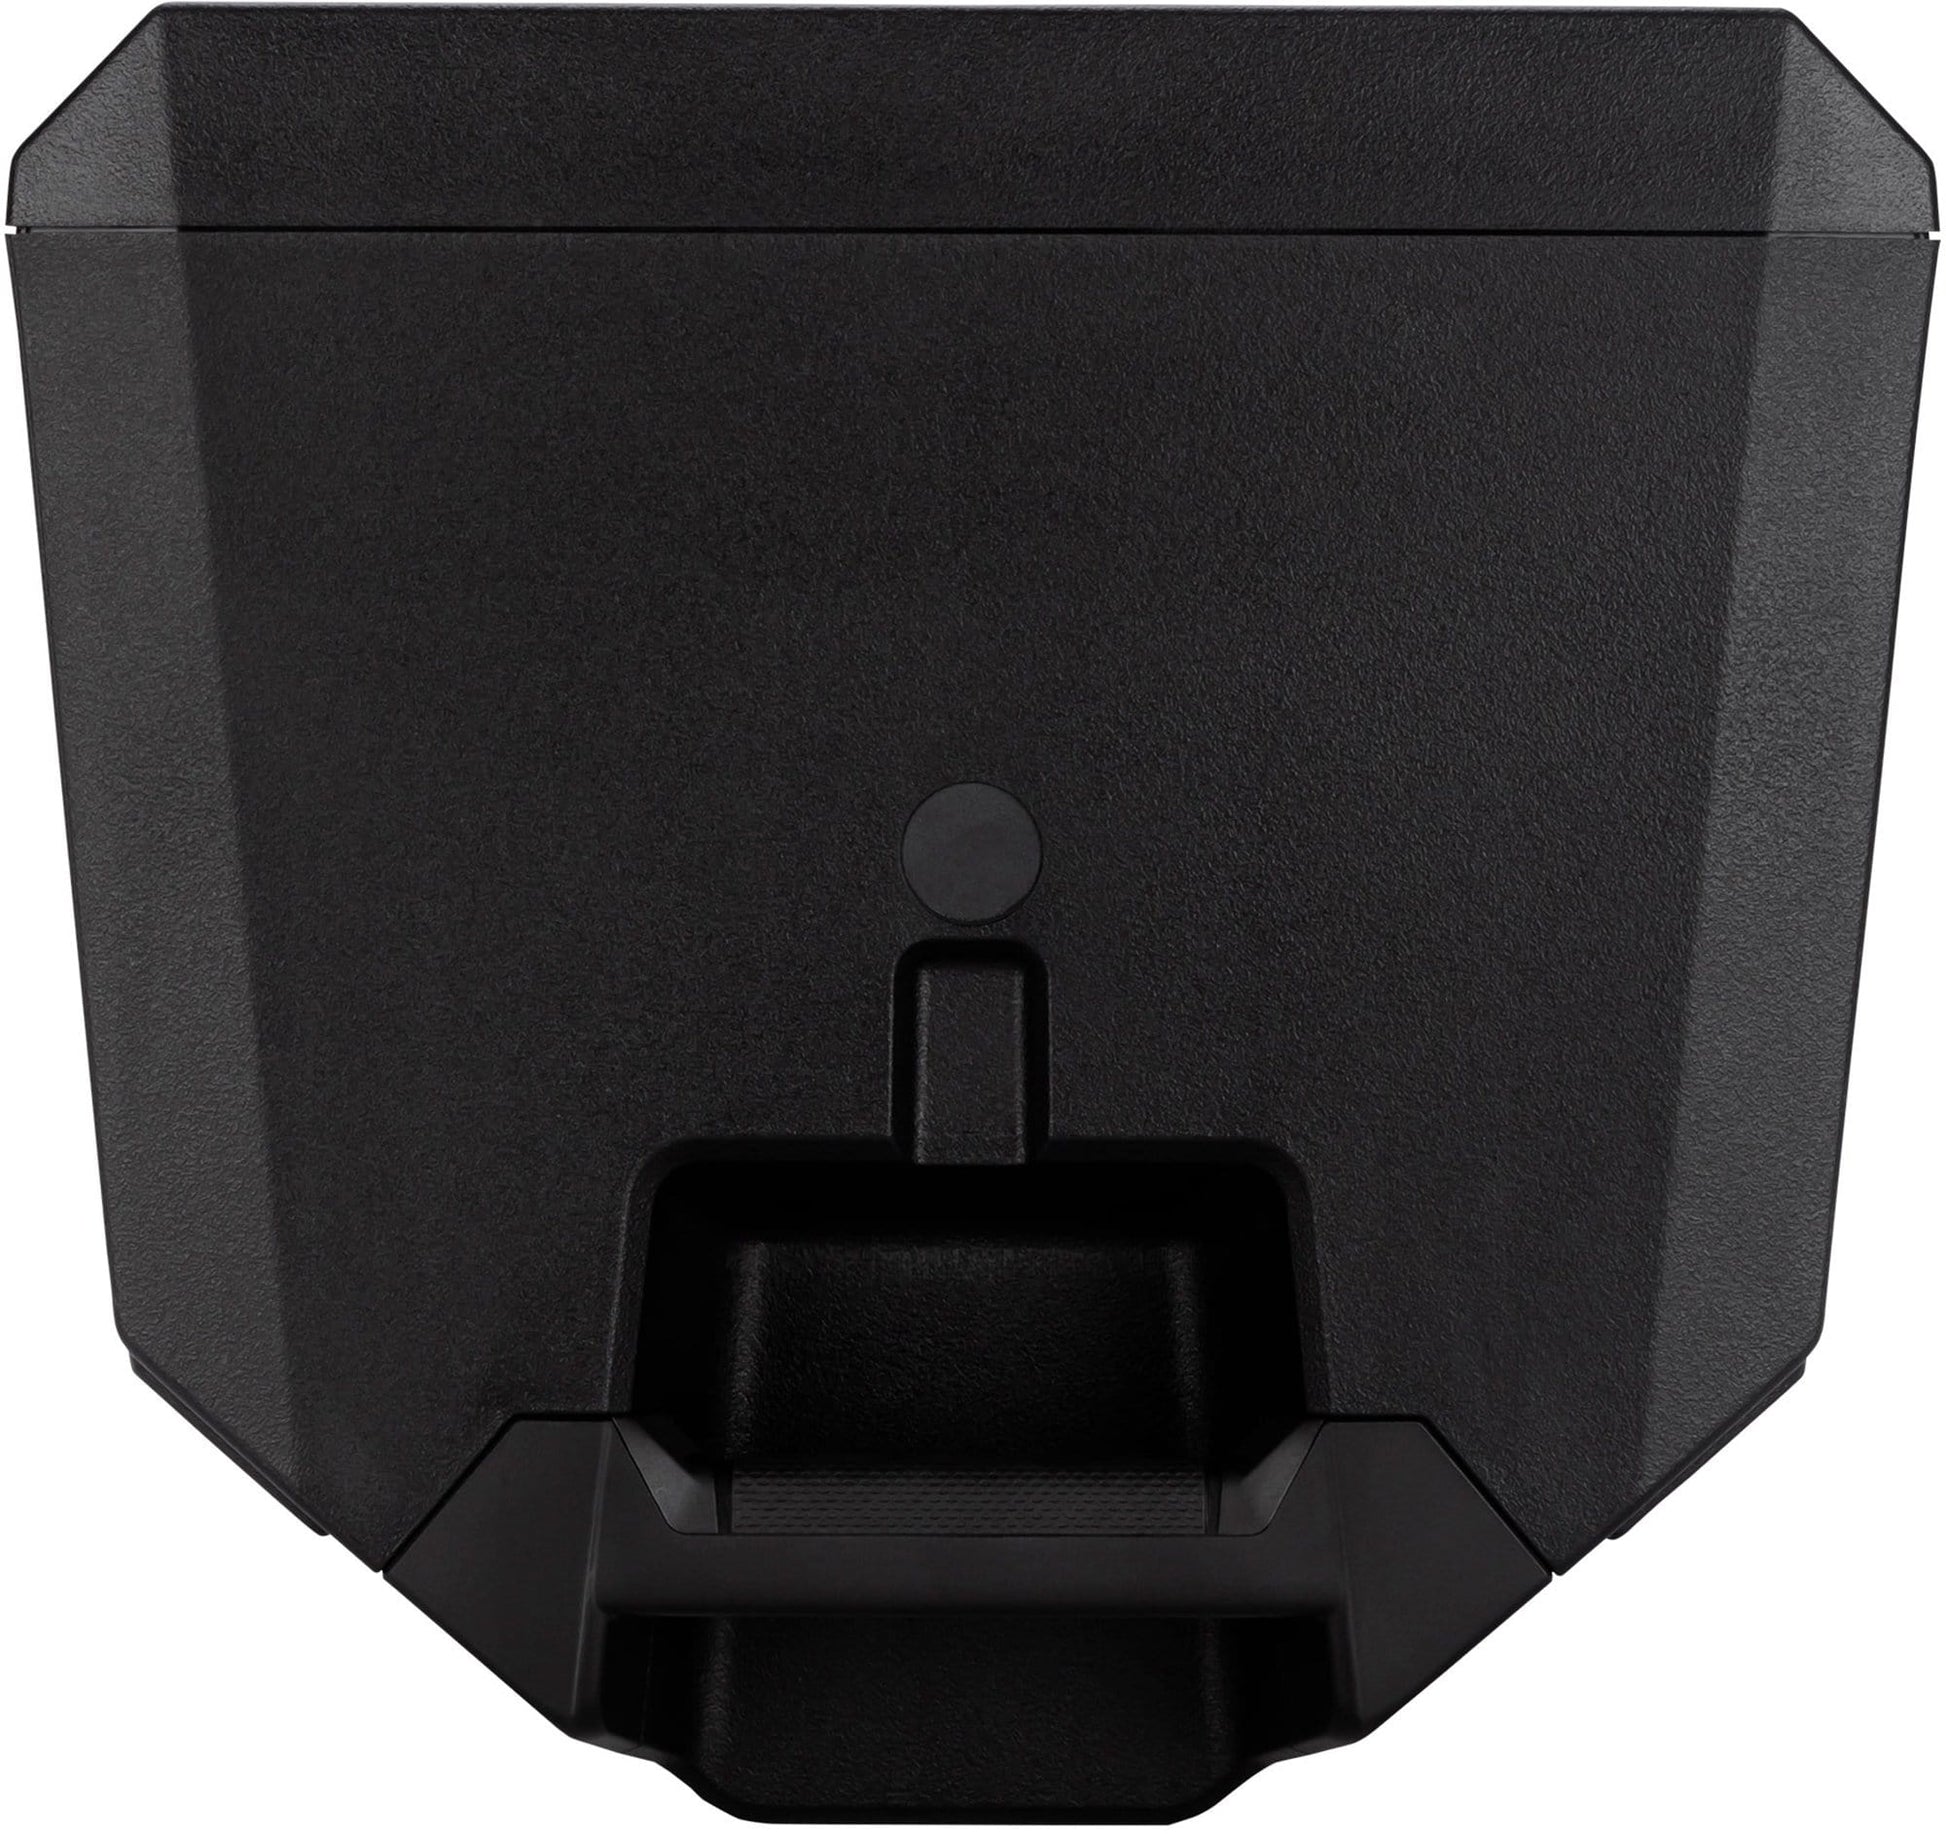 RCF ART-912A-BT 12-in 2-Way 2100W Powered Speaker - PSSL ProSound and Stage Lighting